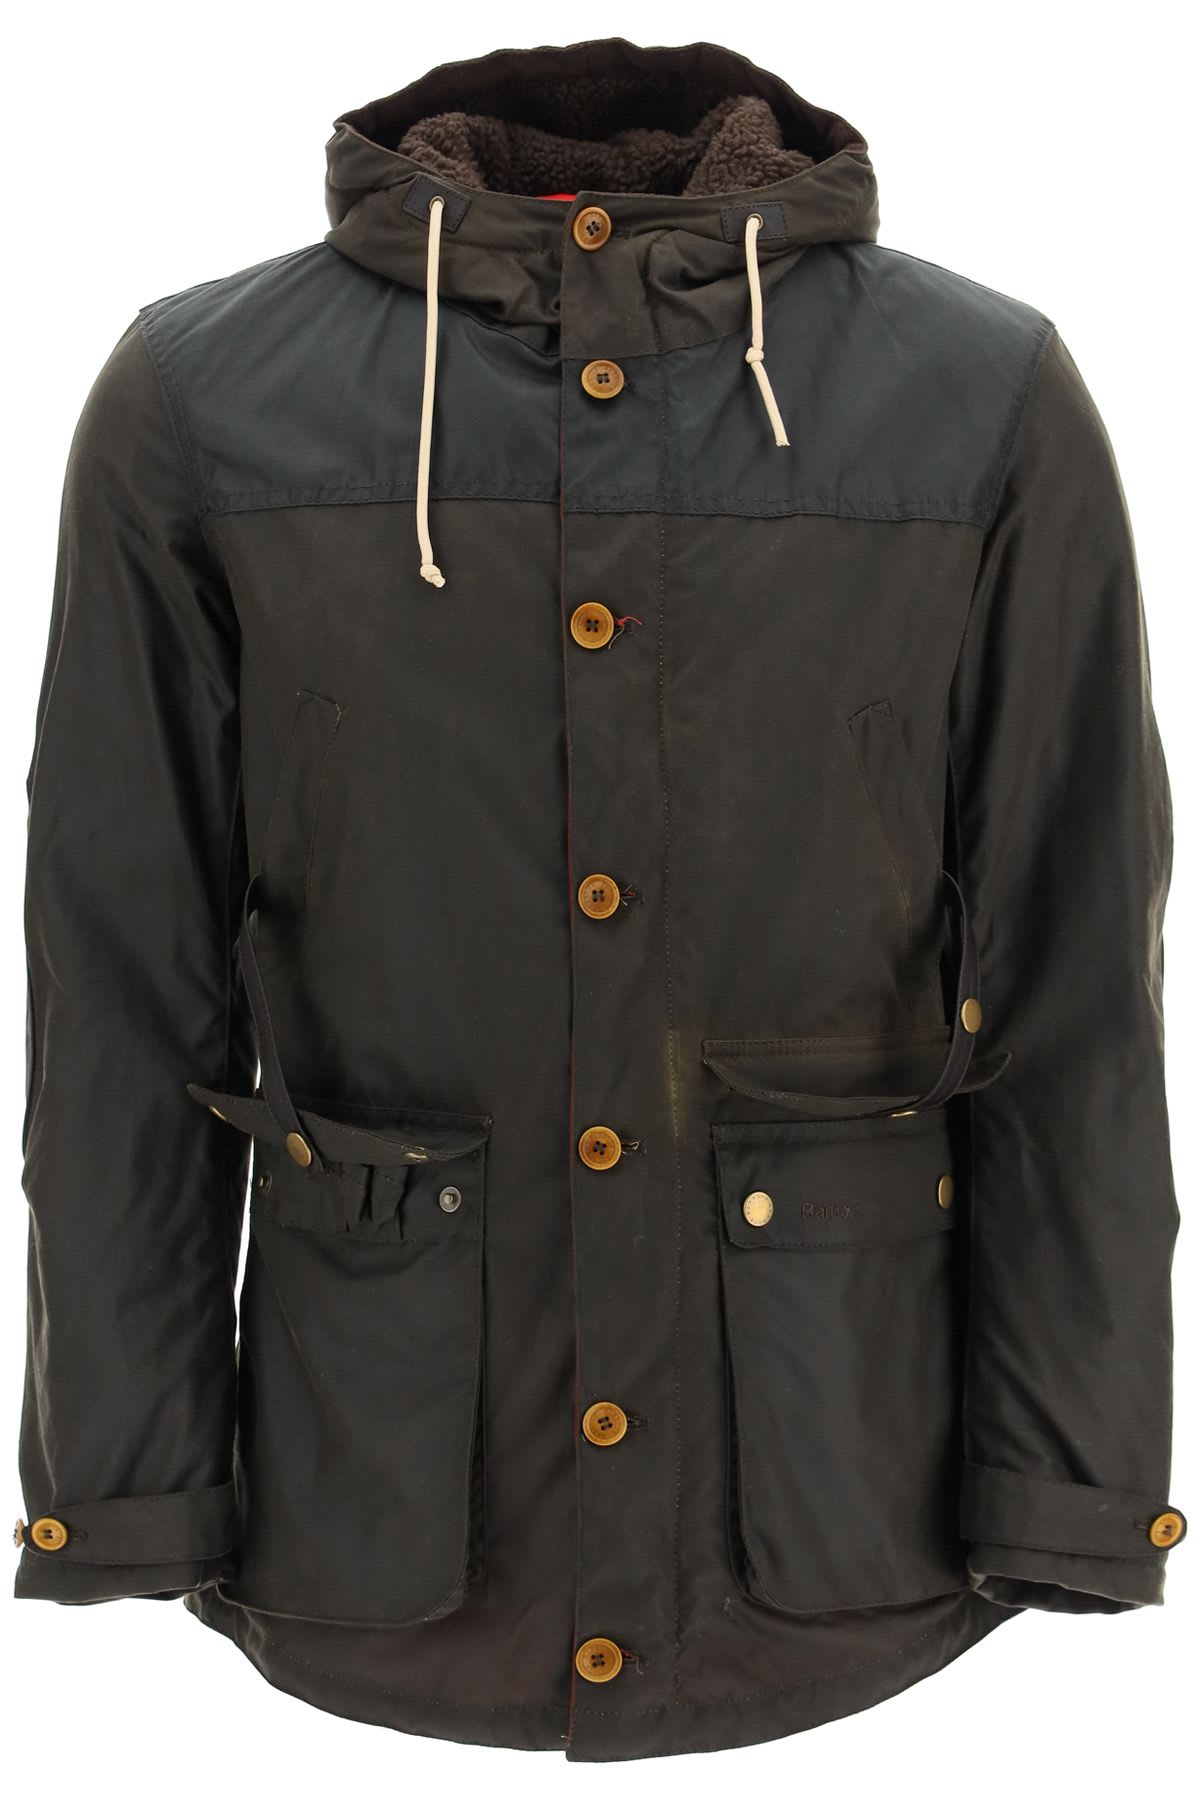 BARBOUR GAME PARKA IN WAXED COTTON BARBOUR